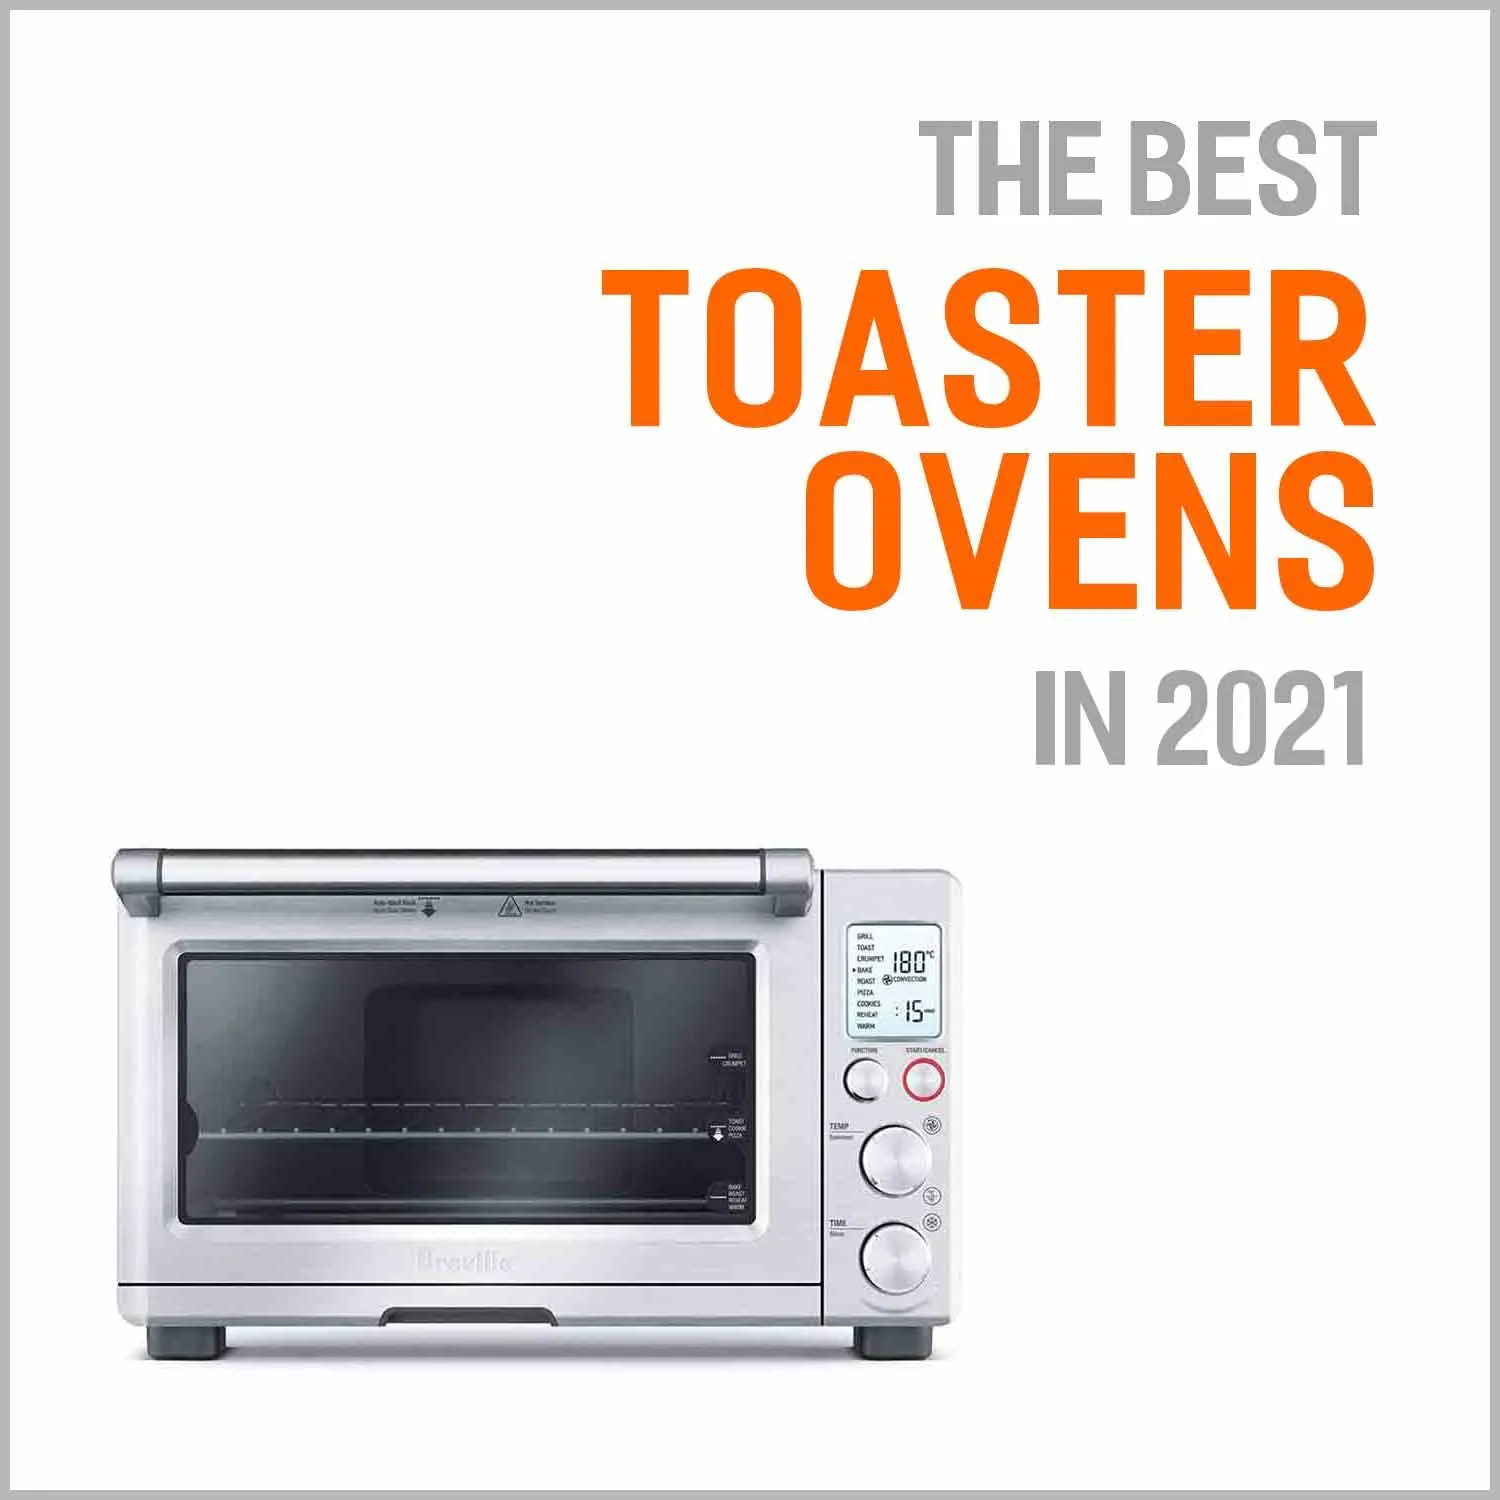 7 Best Toaster Ovens In 2020 And Why They Are Worth Buying,Green And Lavender Color Scheme